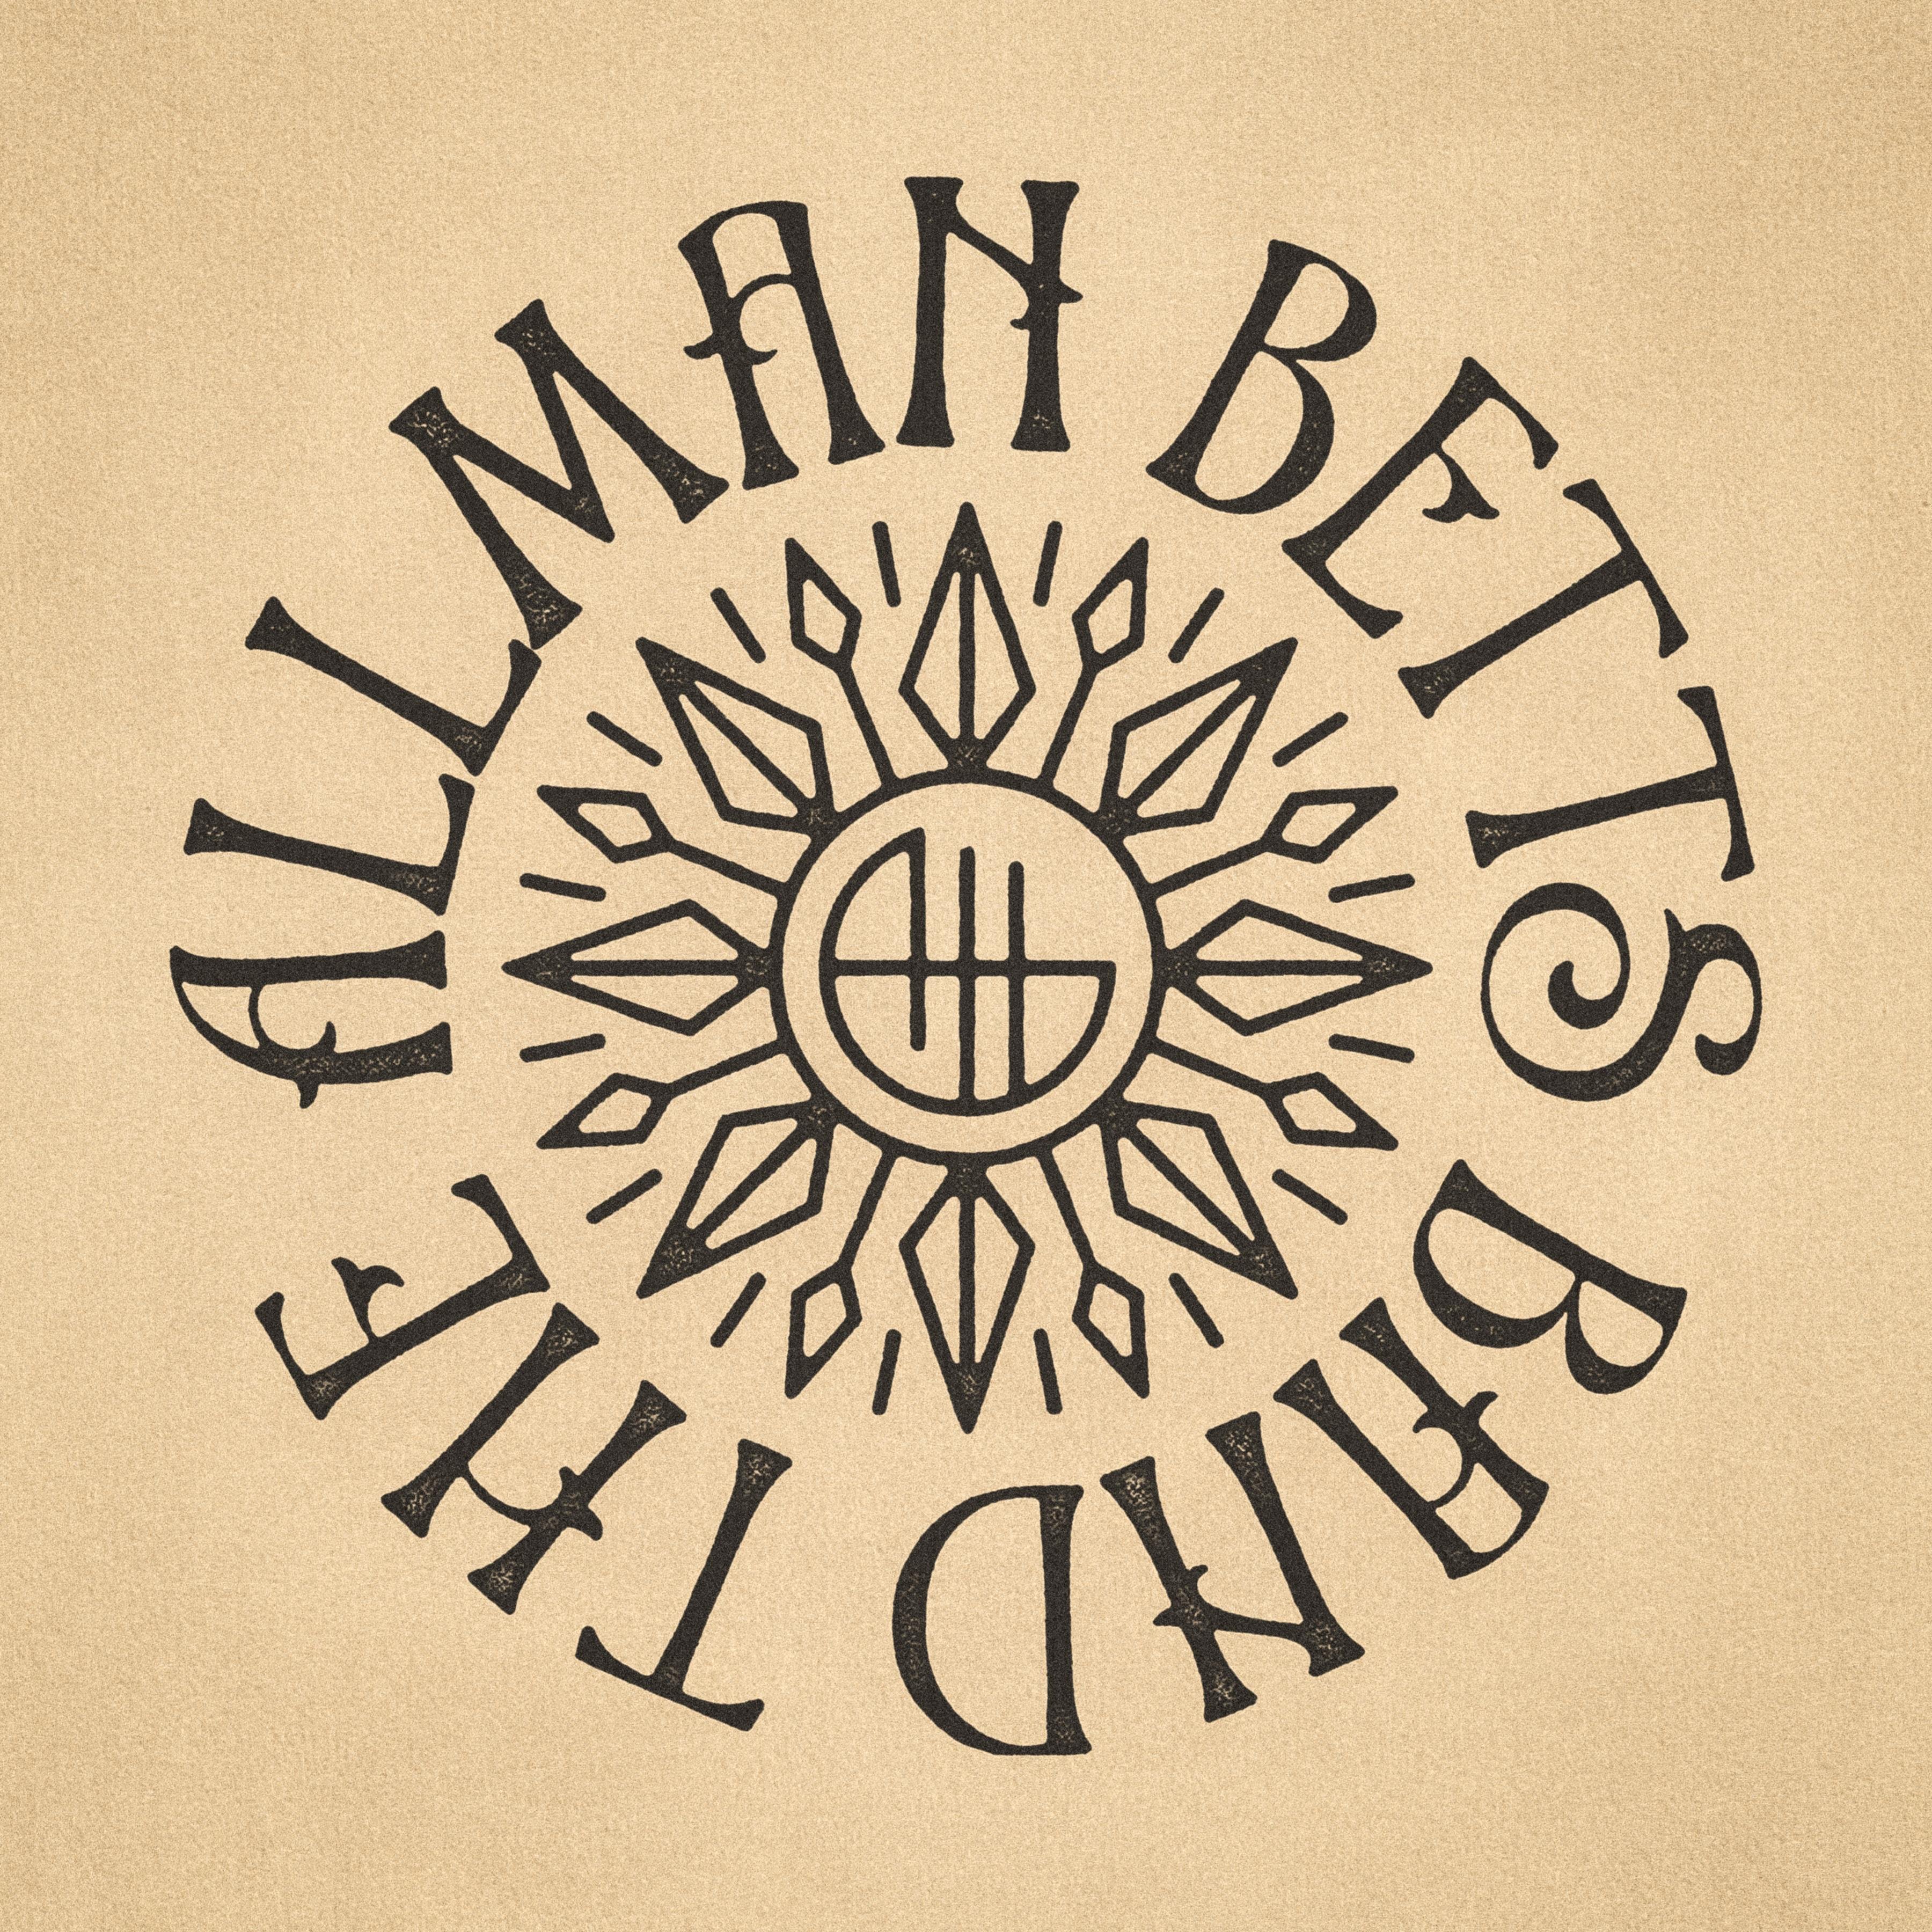 THE ALLMAN BETTS BAND (USA) – Down To The River